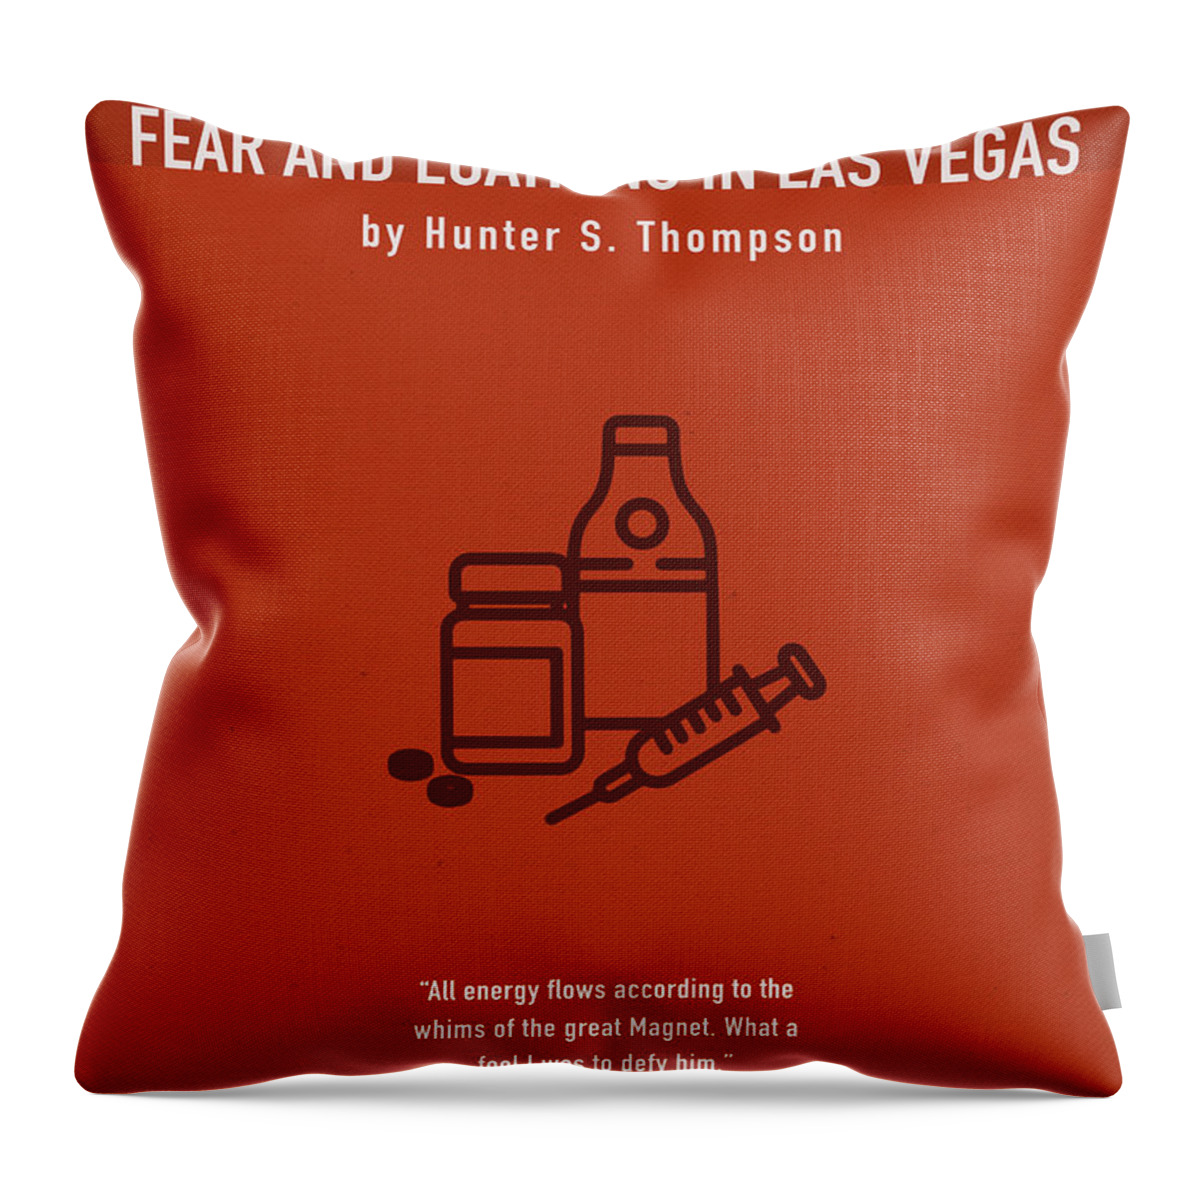 Fear And Loathing In Las Vegas Throw Pillow featuring the mixed media Fear and Loathing in Las Vegas by Hunter S Thompson Greatest Book Series 126 by Design Turnpike